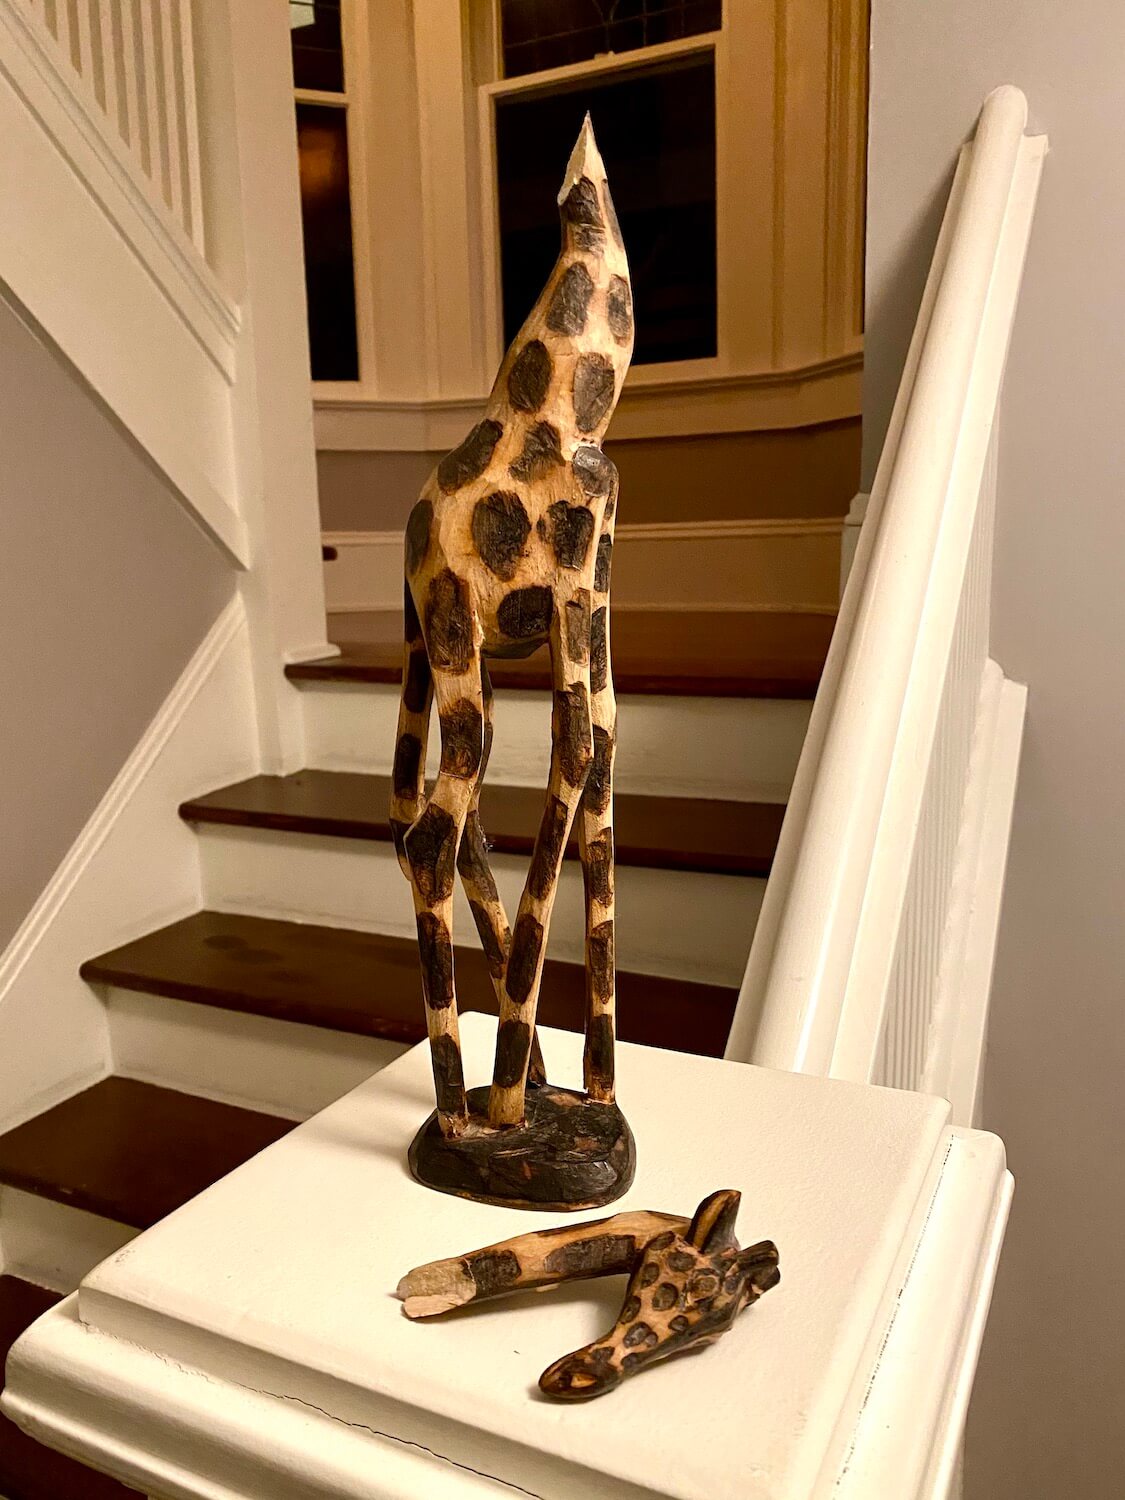 A wooden giraffe with brown spots burnt into the lighter blond wood stands on the banister of a stairway with the severed head laying down on the white banister.  